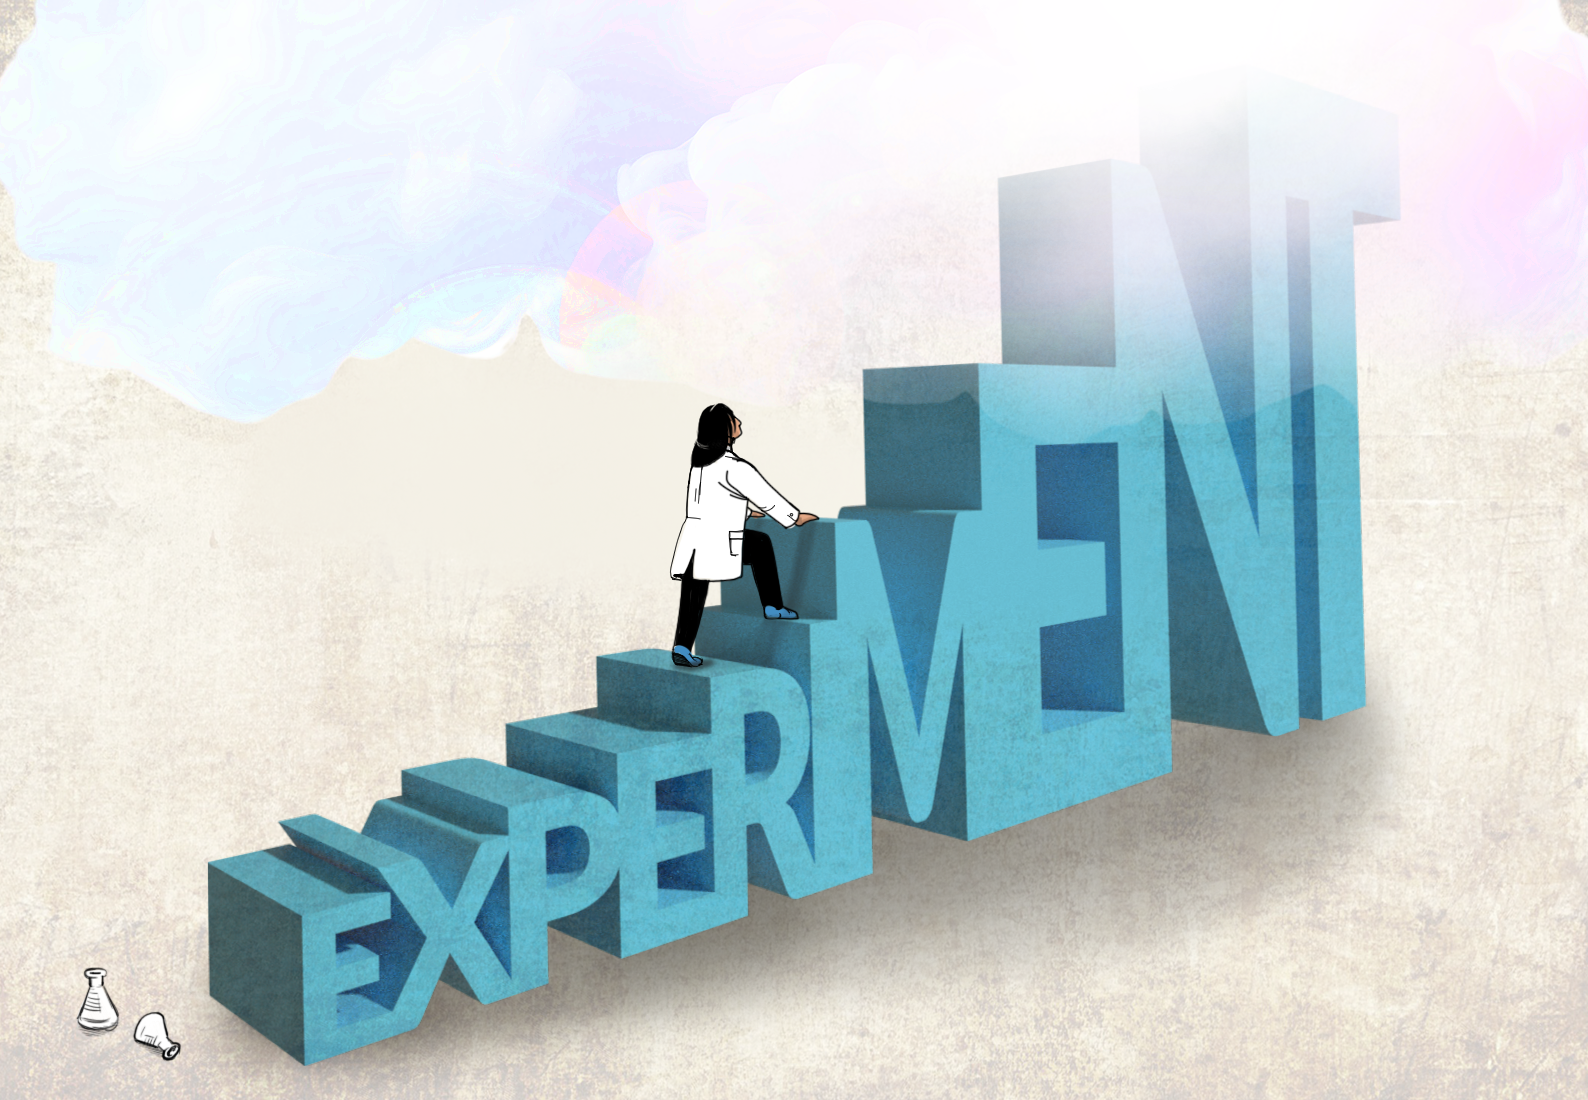 Image of a scientist climbing block letter text spelling out the word "EXPERIMENT."